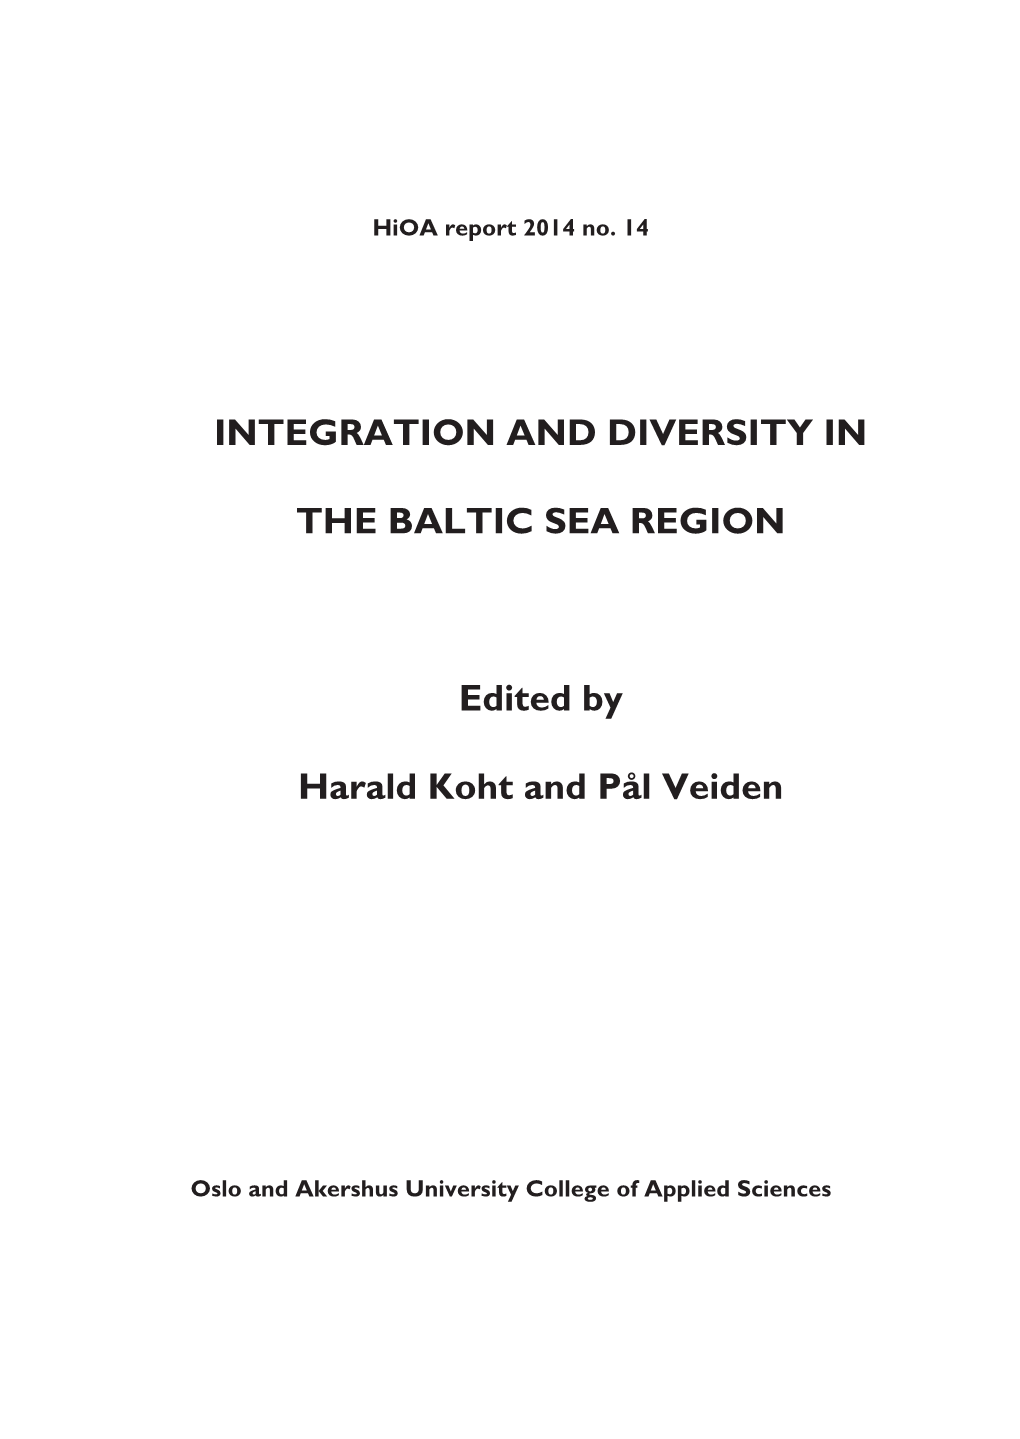 INTEGRATION and DIVERSITY in the BALTIC SEA REGION Edited